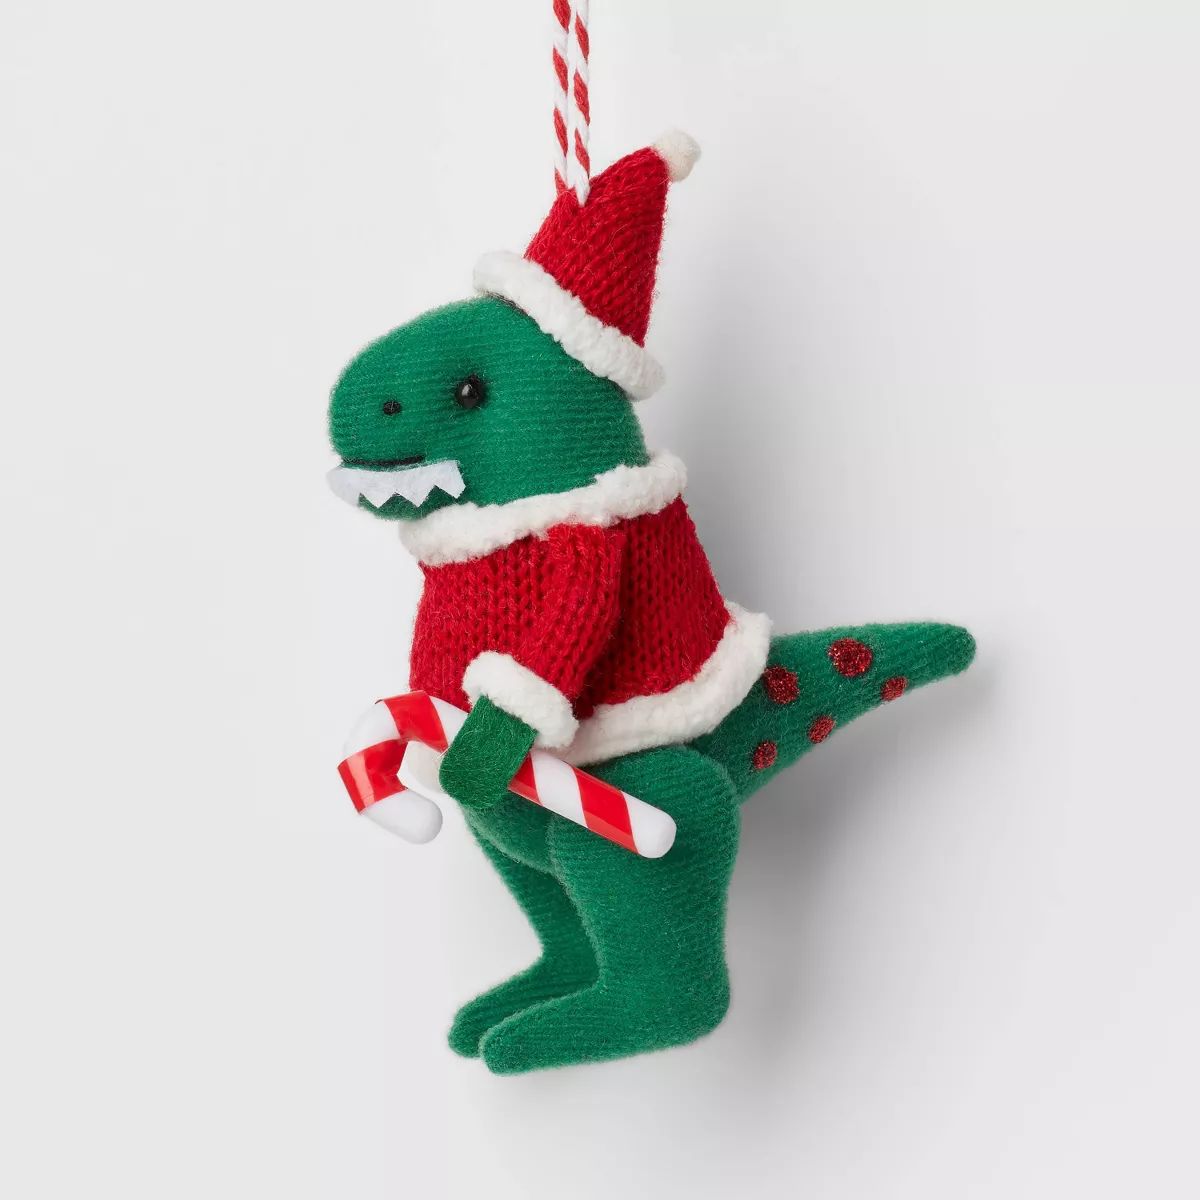 Fabric Tyrannosaurus Rex with Candy Cane Christmas Tree Ornament Green/Red - Wondershop™ | Target